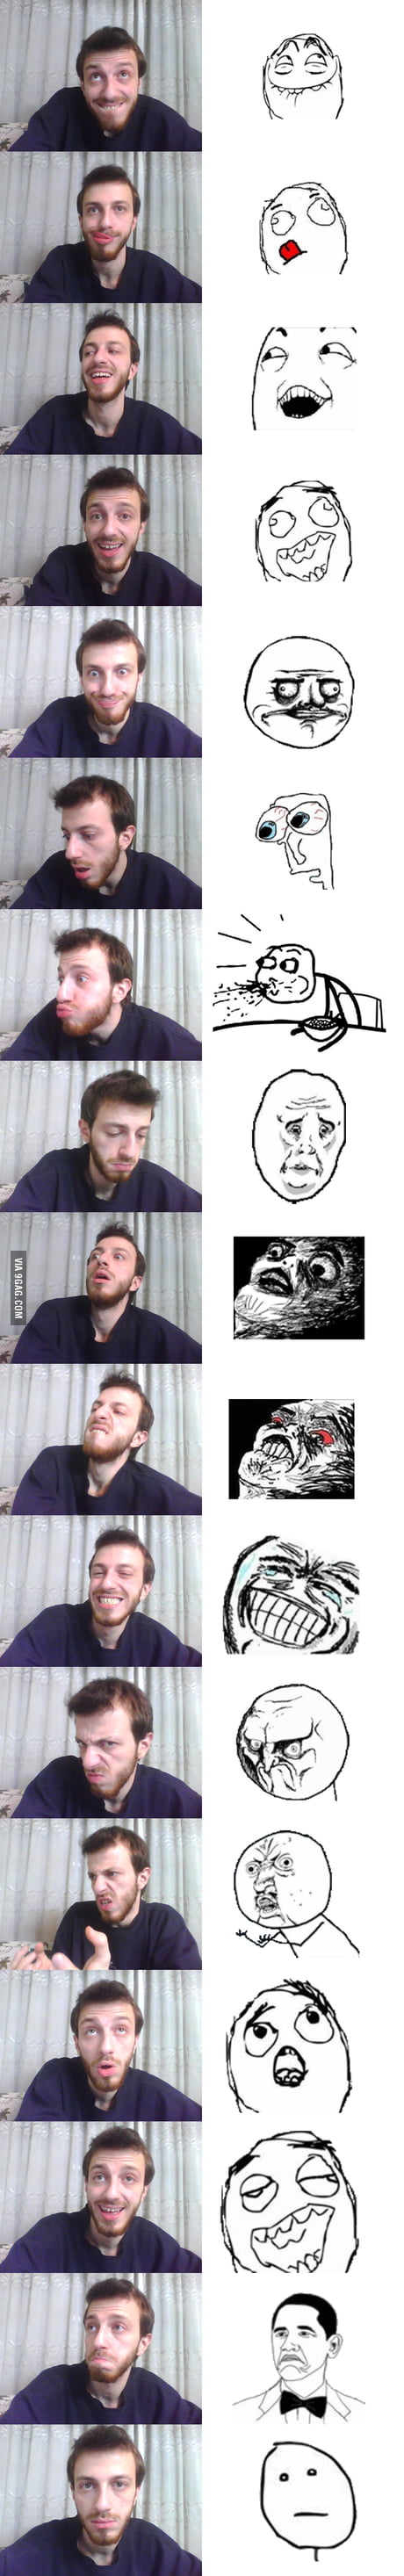 MEME FACES IN REAL LIFE! 